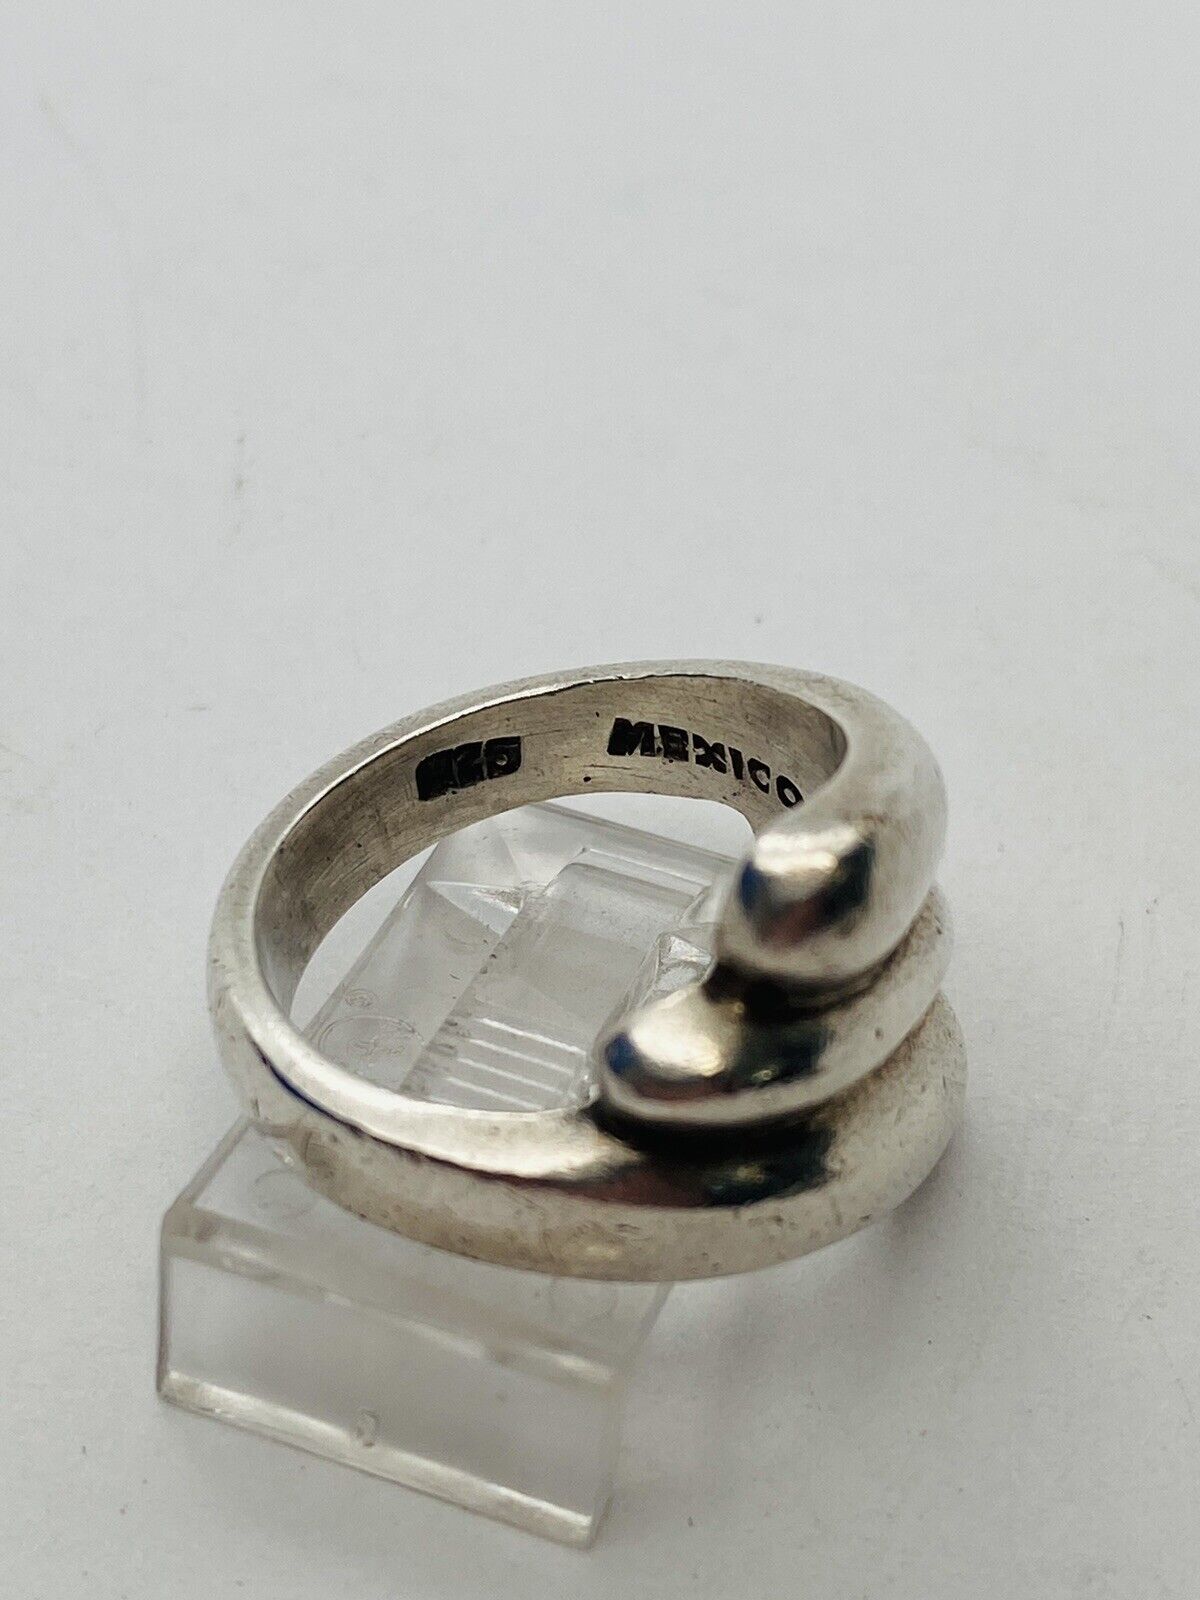 SIZE 7 10.3g 925 VINTAGE TAXCO WAVE RING STAMPED STERLING SILVER FINE